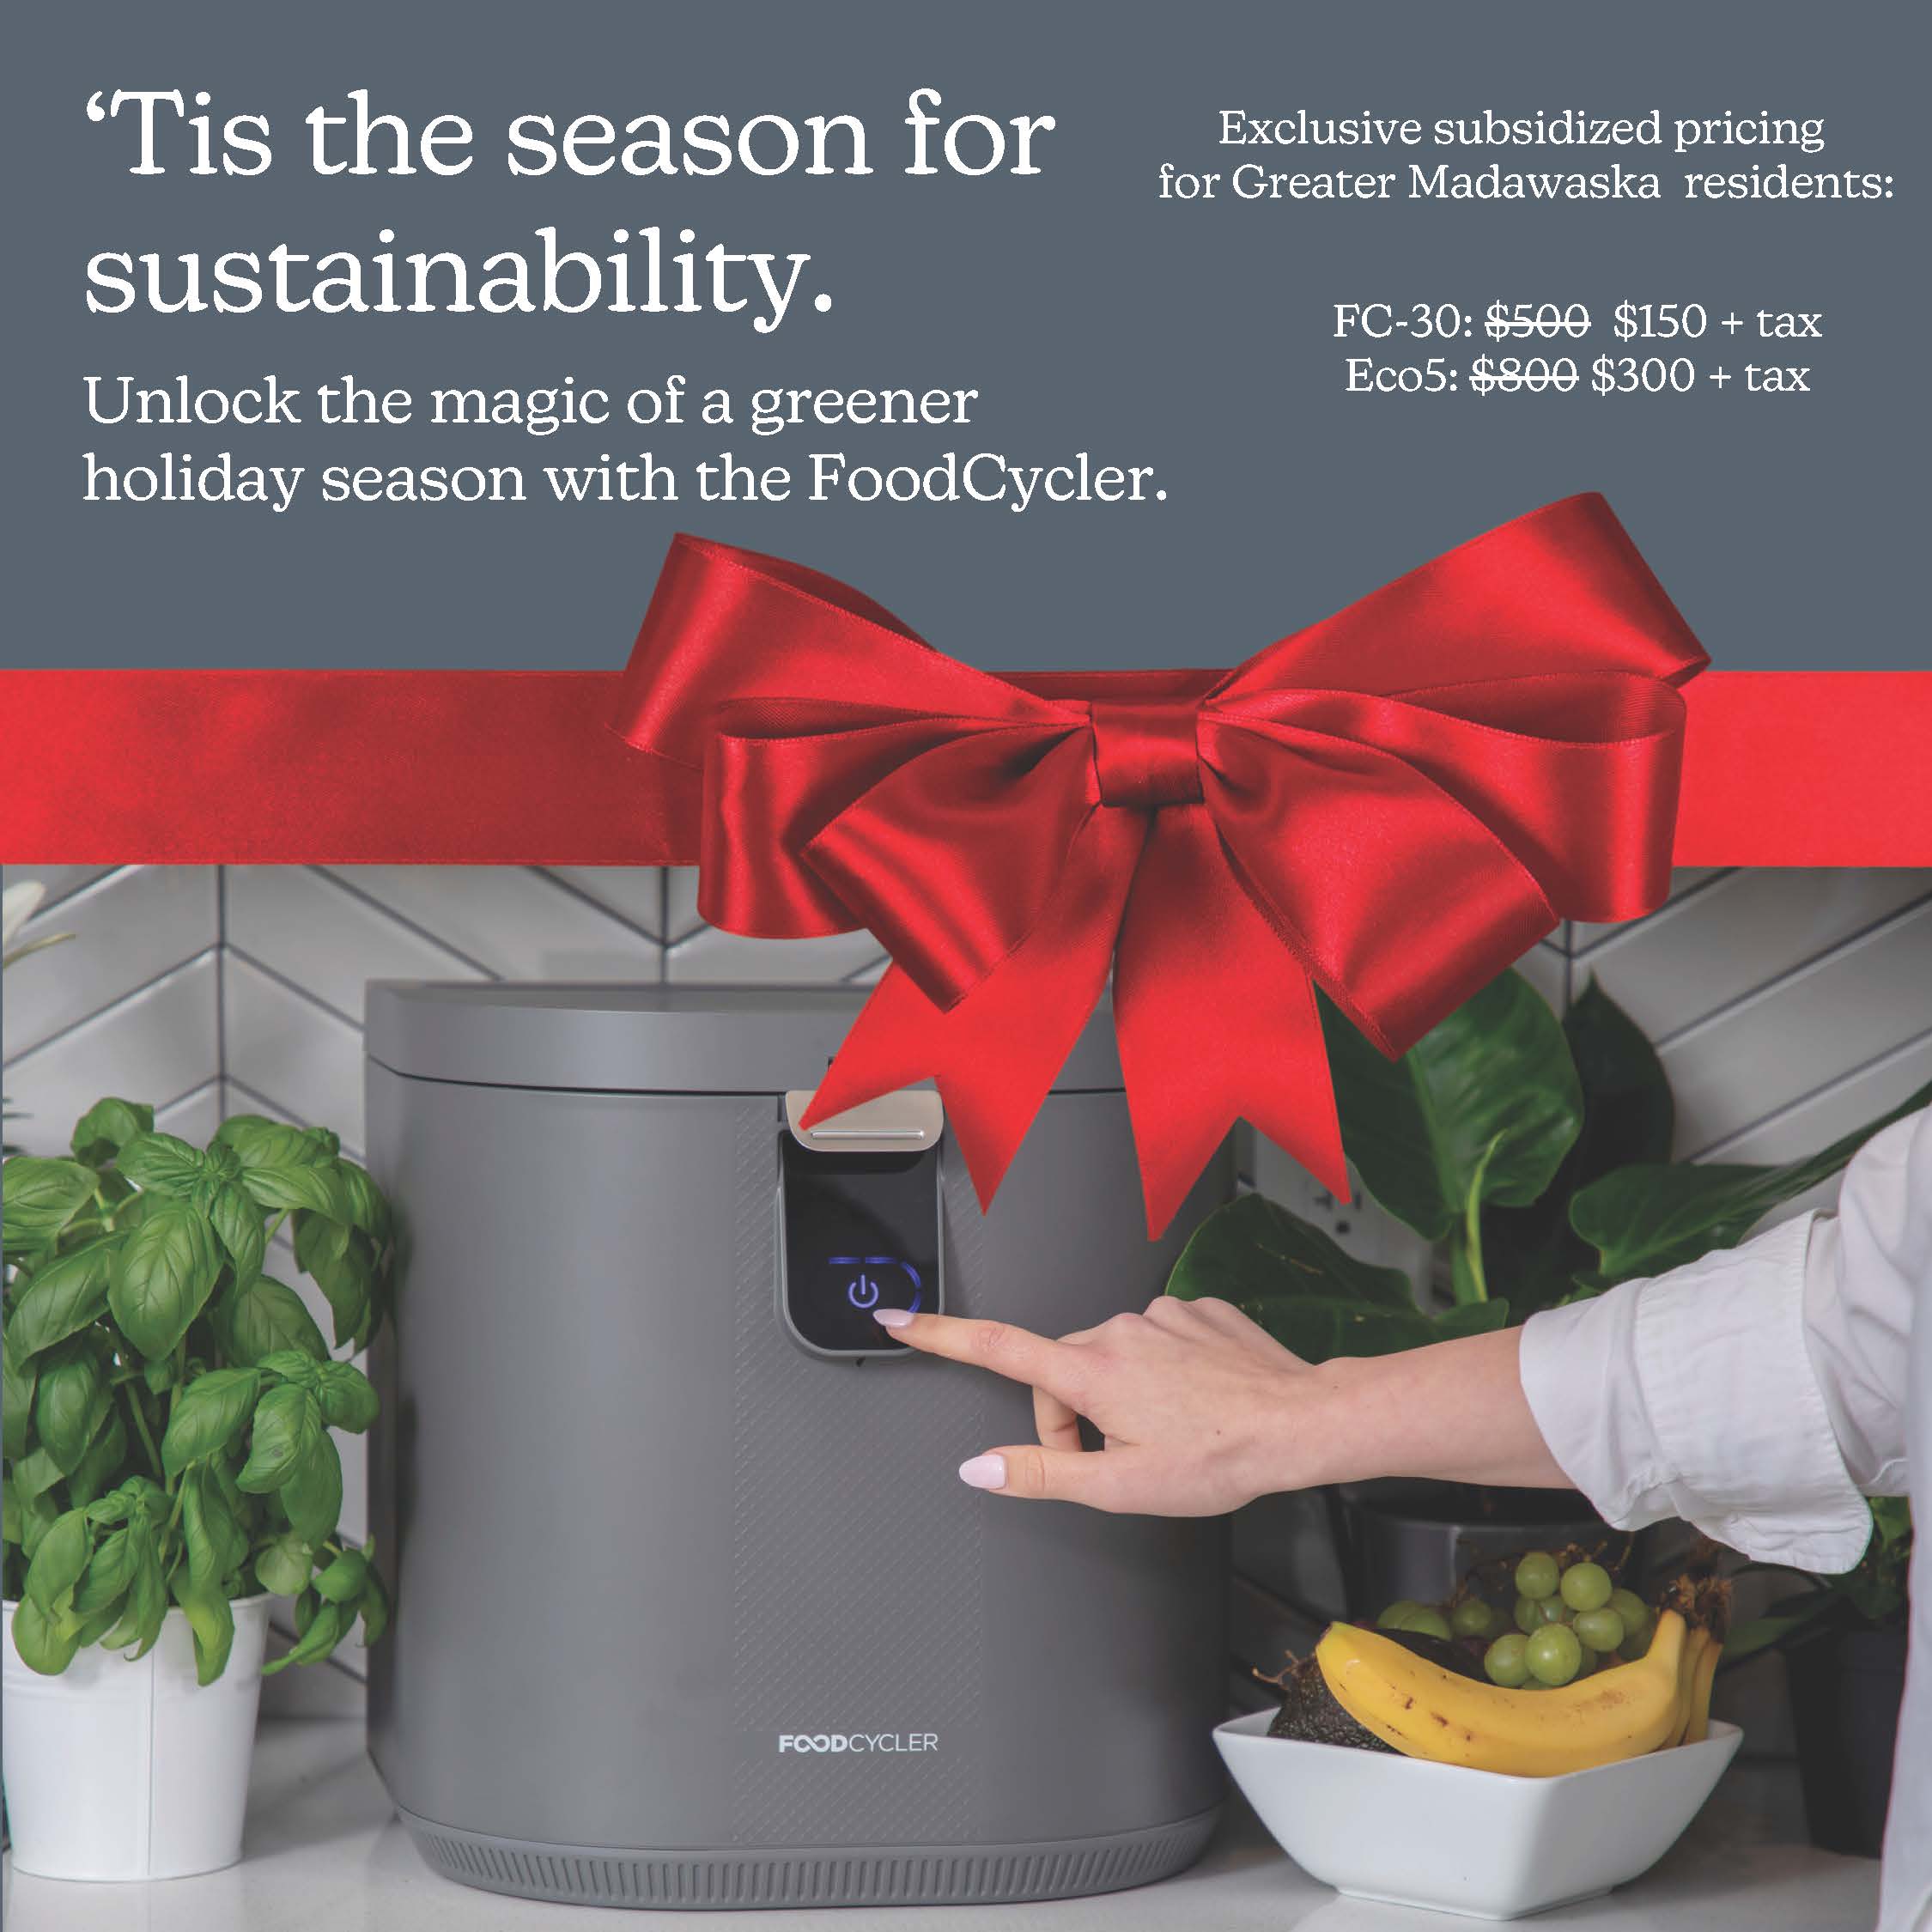 foodcycler unit with red bow, pointing hand, gray background